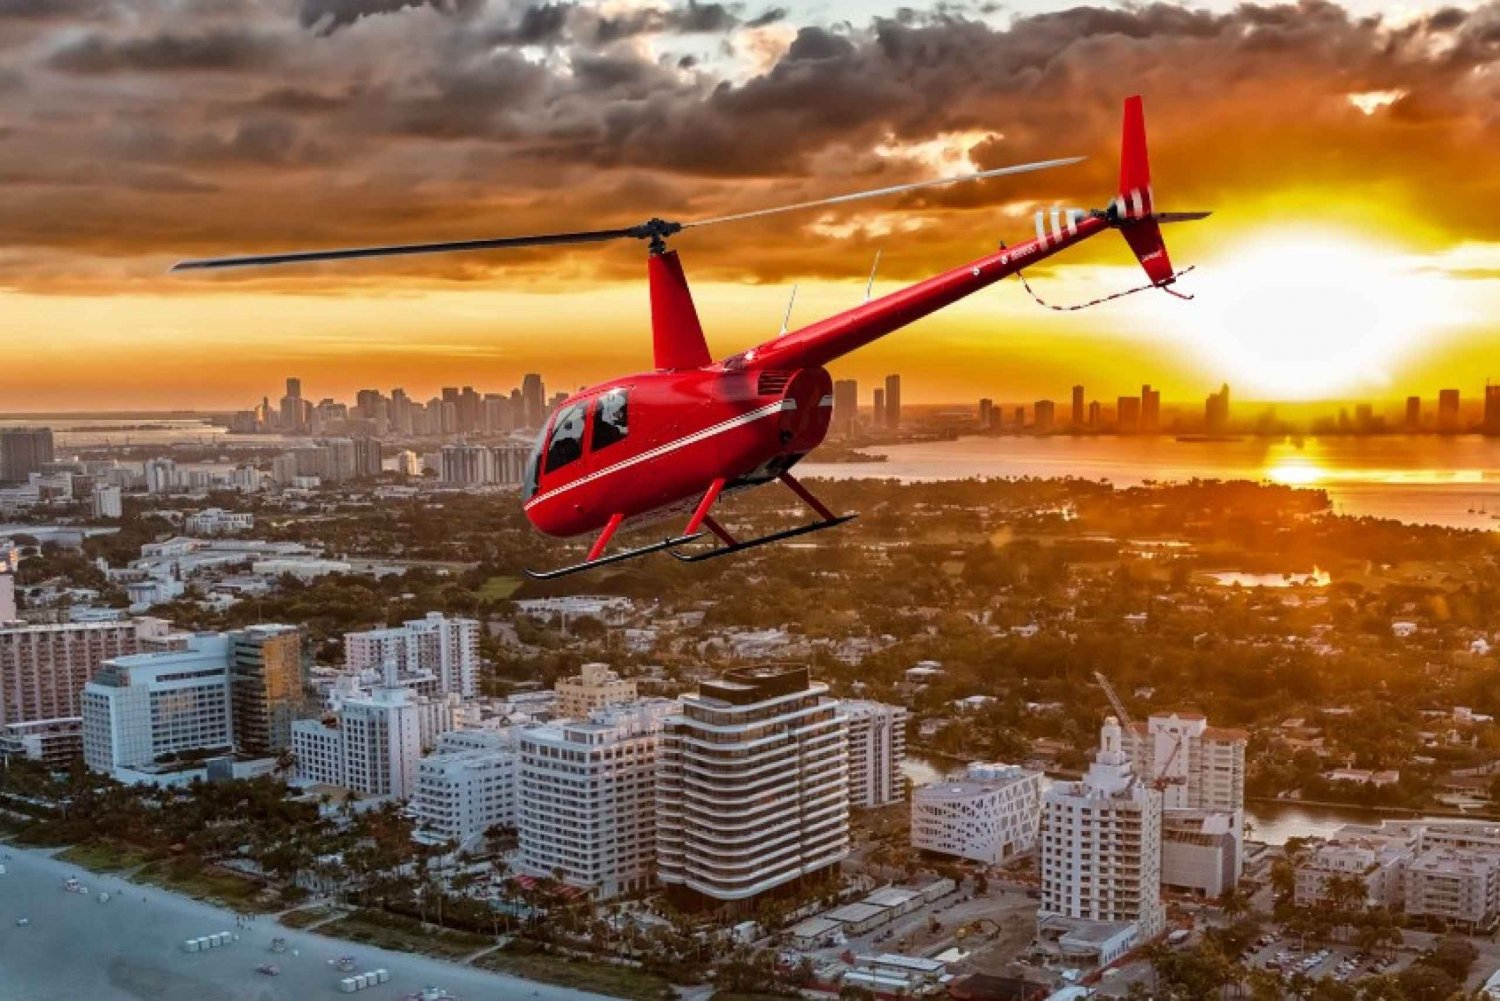 Miami Beach: 30-minuters privat solnedgångstur med lyxig helikopter